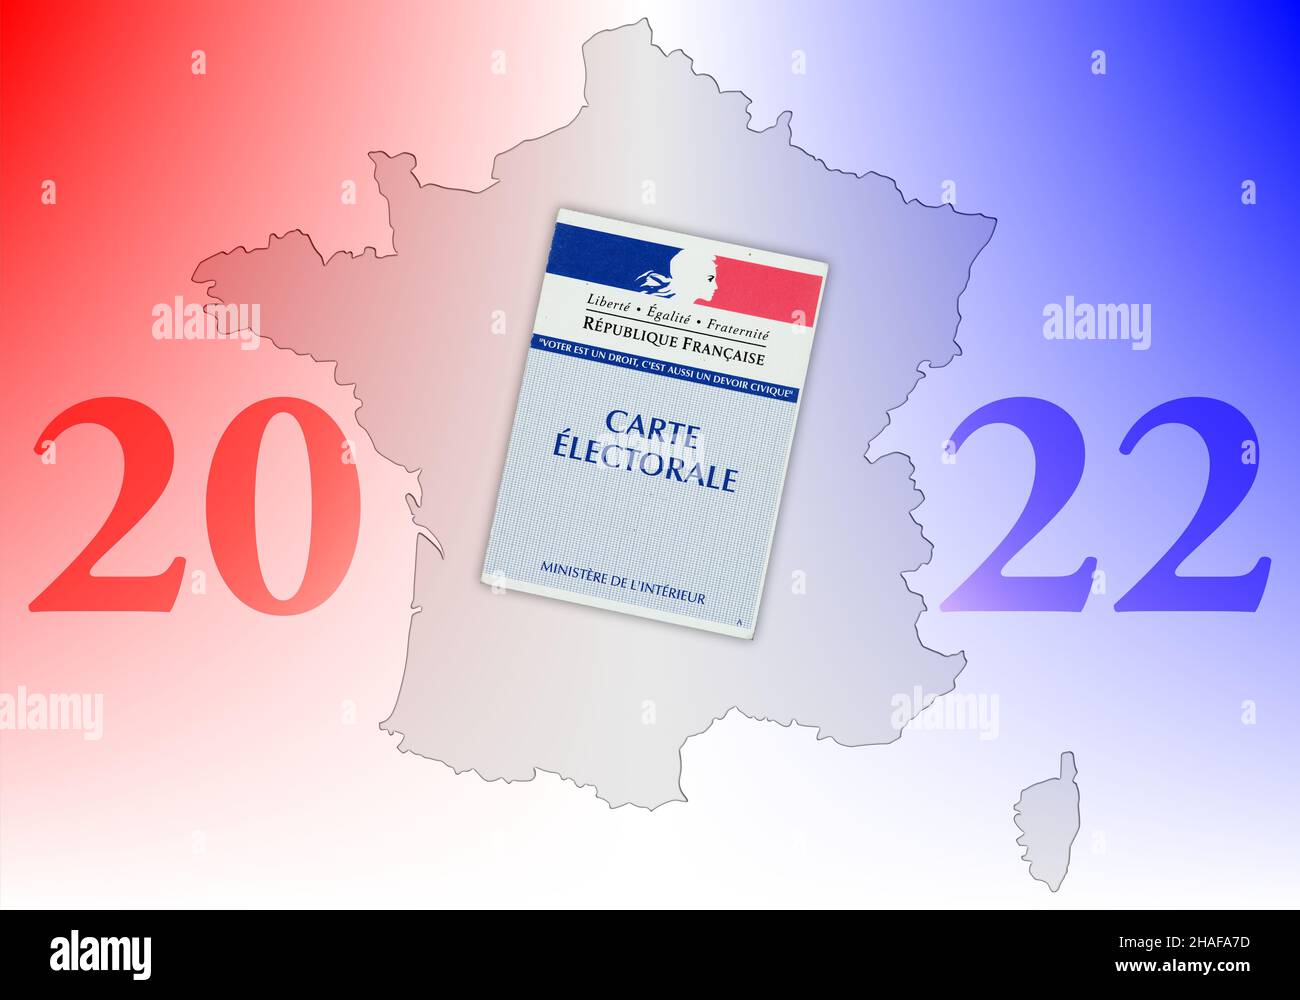 Illustration for French presidential elections 2022 Stock Photo